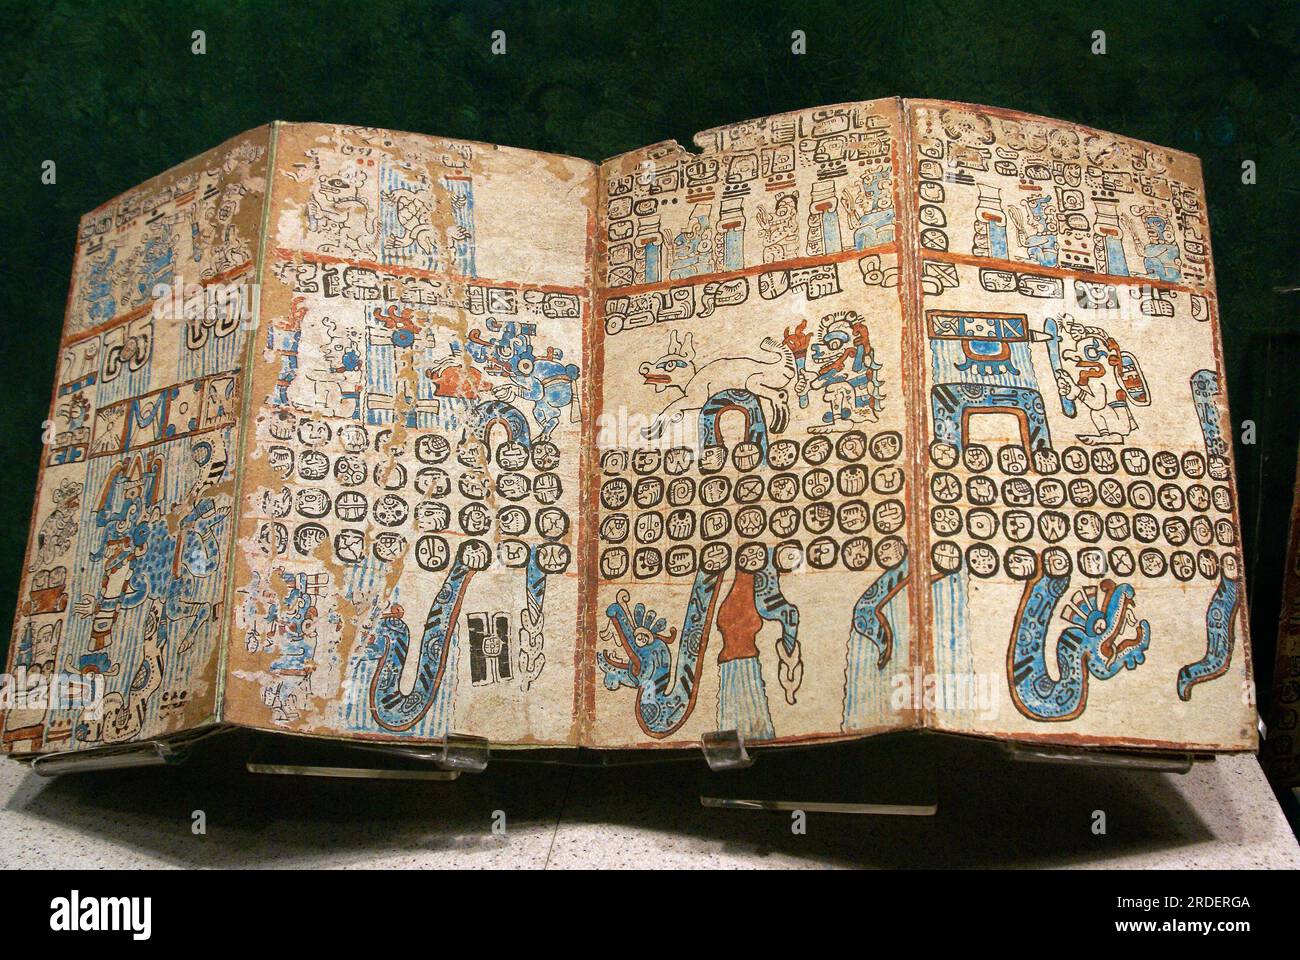 Grolier Codex. Feathered Serpent, Mayan Culture. State of Mexico D.F. Mexico. Stock Photo